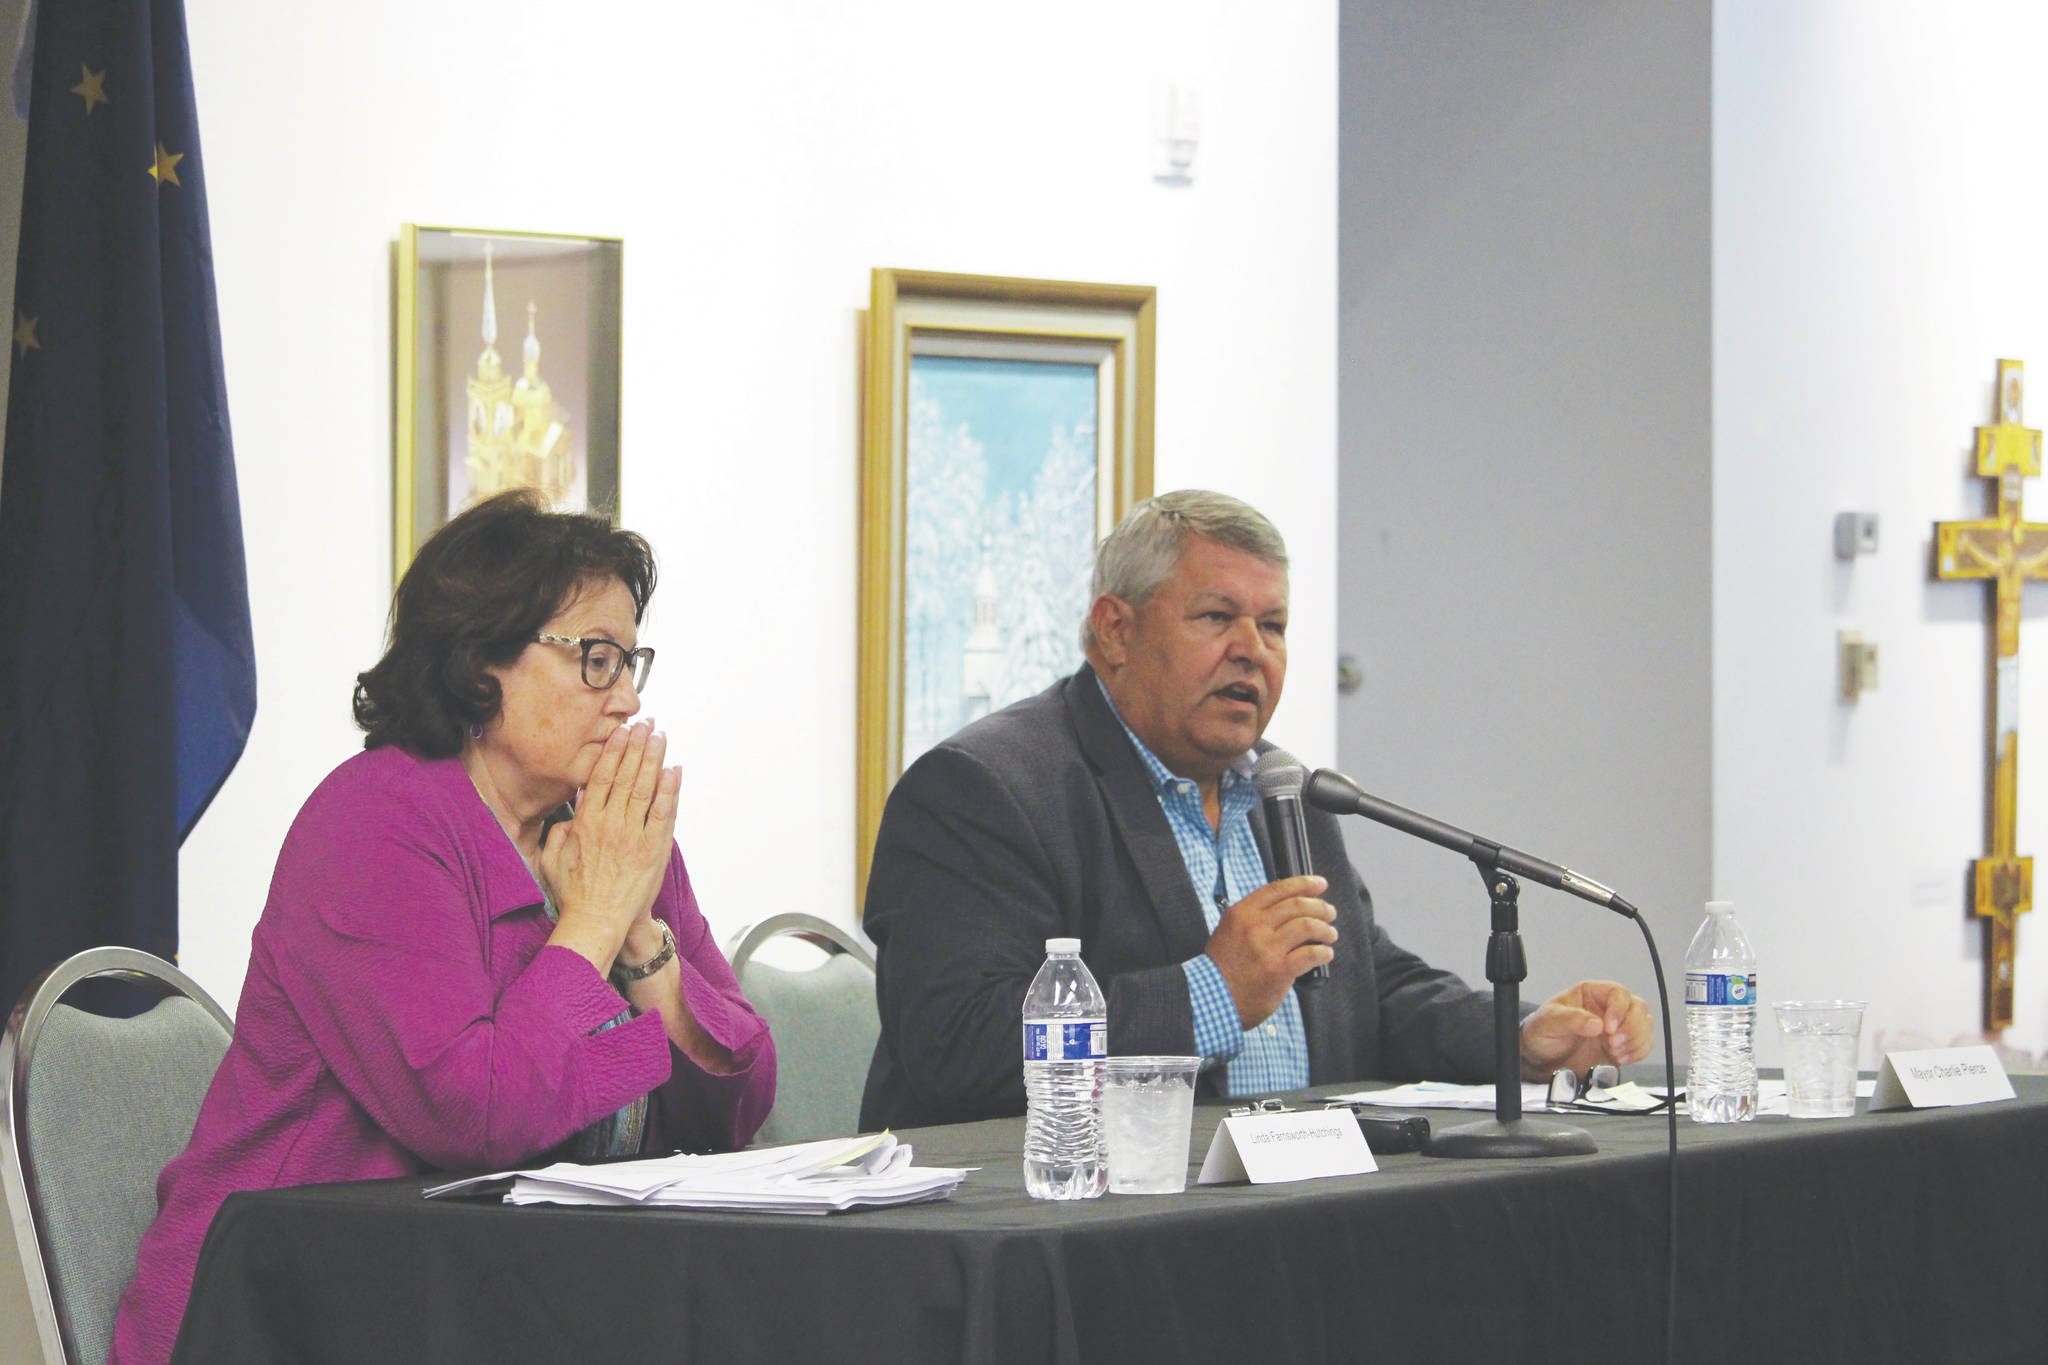 Linda Farnsworth Hutchings, left, and Kenai Peninsula Borough Mayor Charlie Pierce, right, participate in a mayoral candidate forum hosted by the Kenai Chamber of Commerce at the Kenai Visitor and Cultural Center on Sept. 9, 2020. (Photo by Brian Mazurek/Peninsula Clarion)